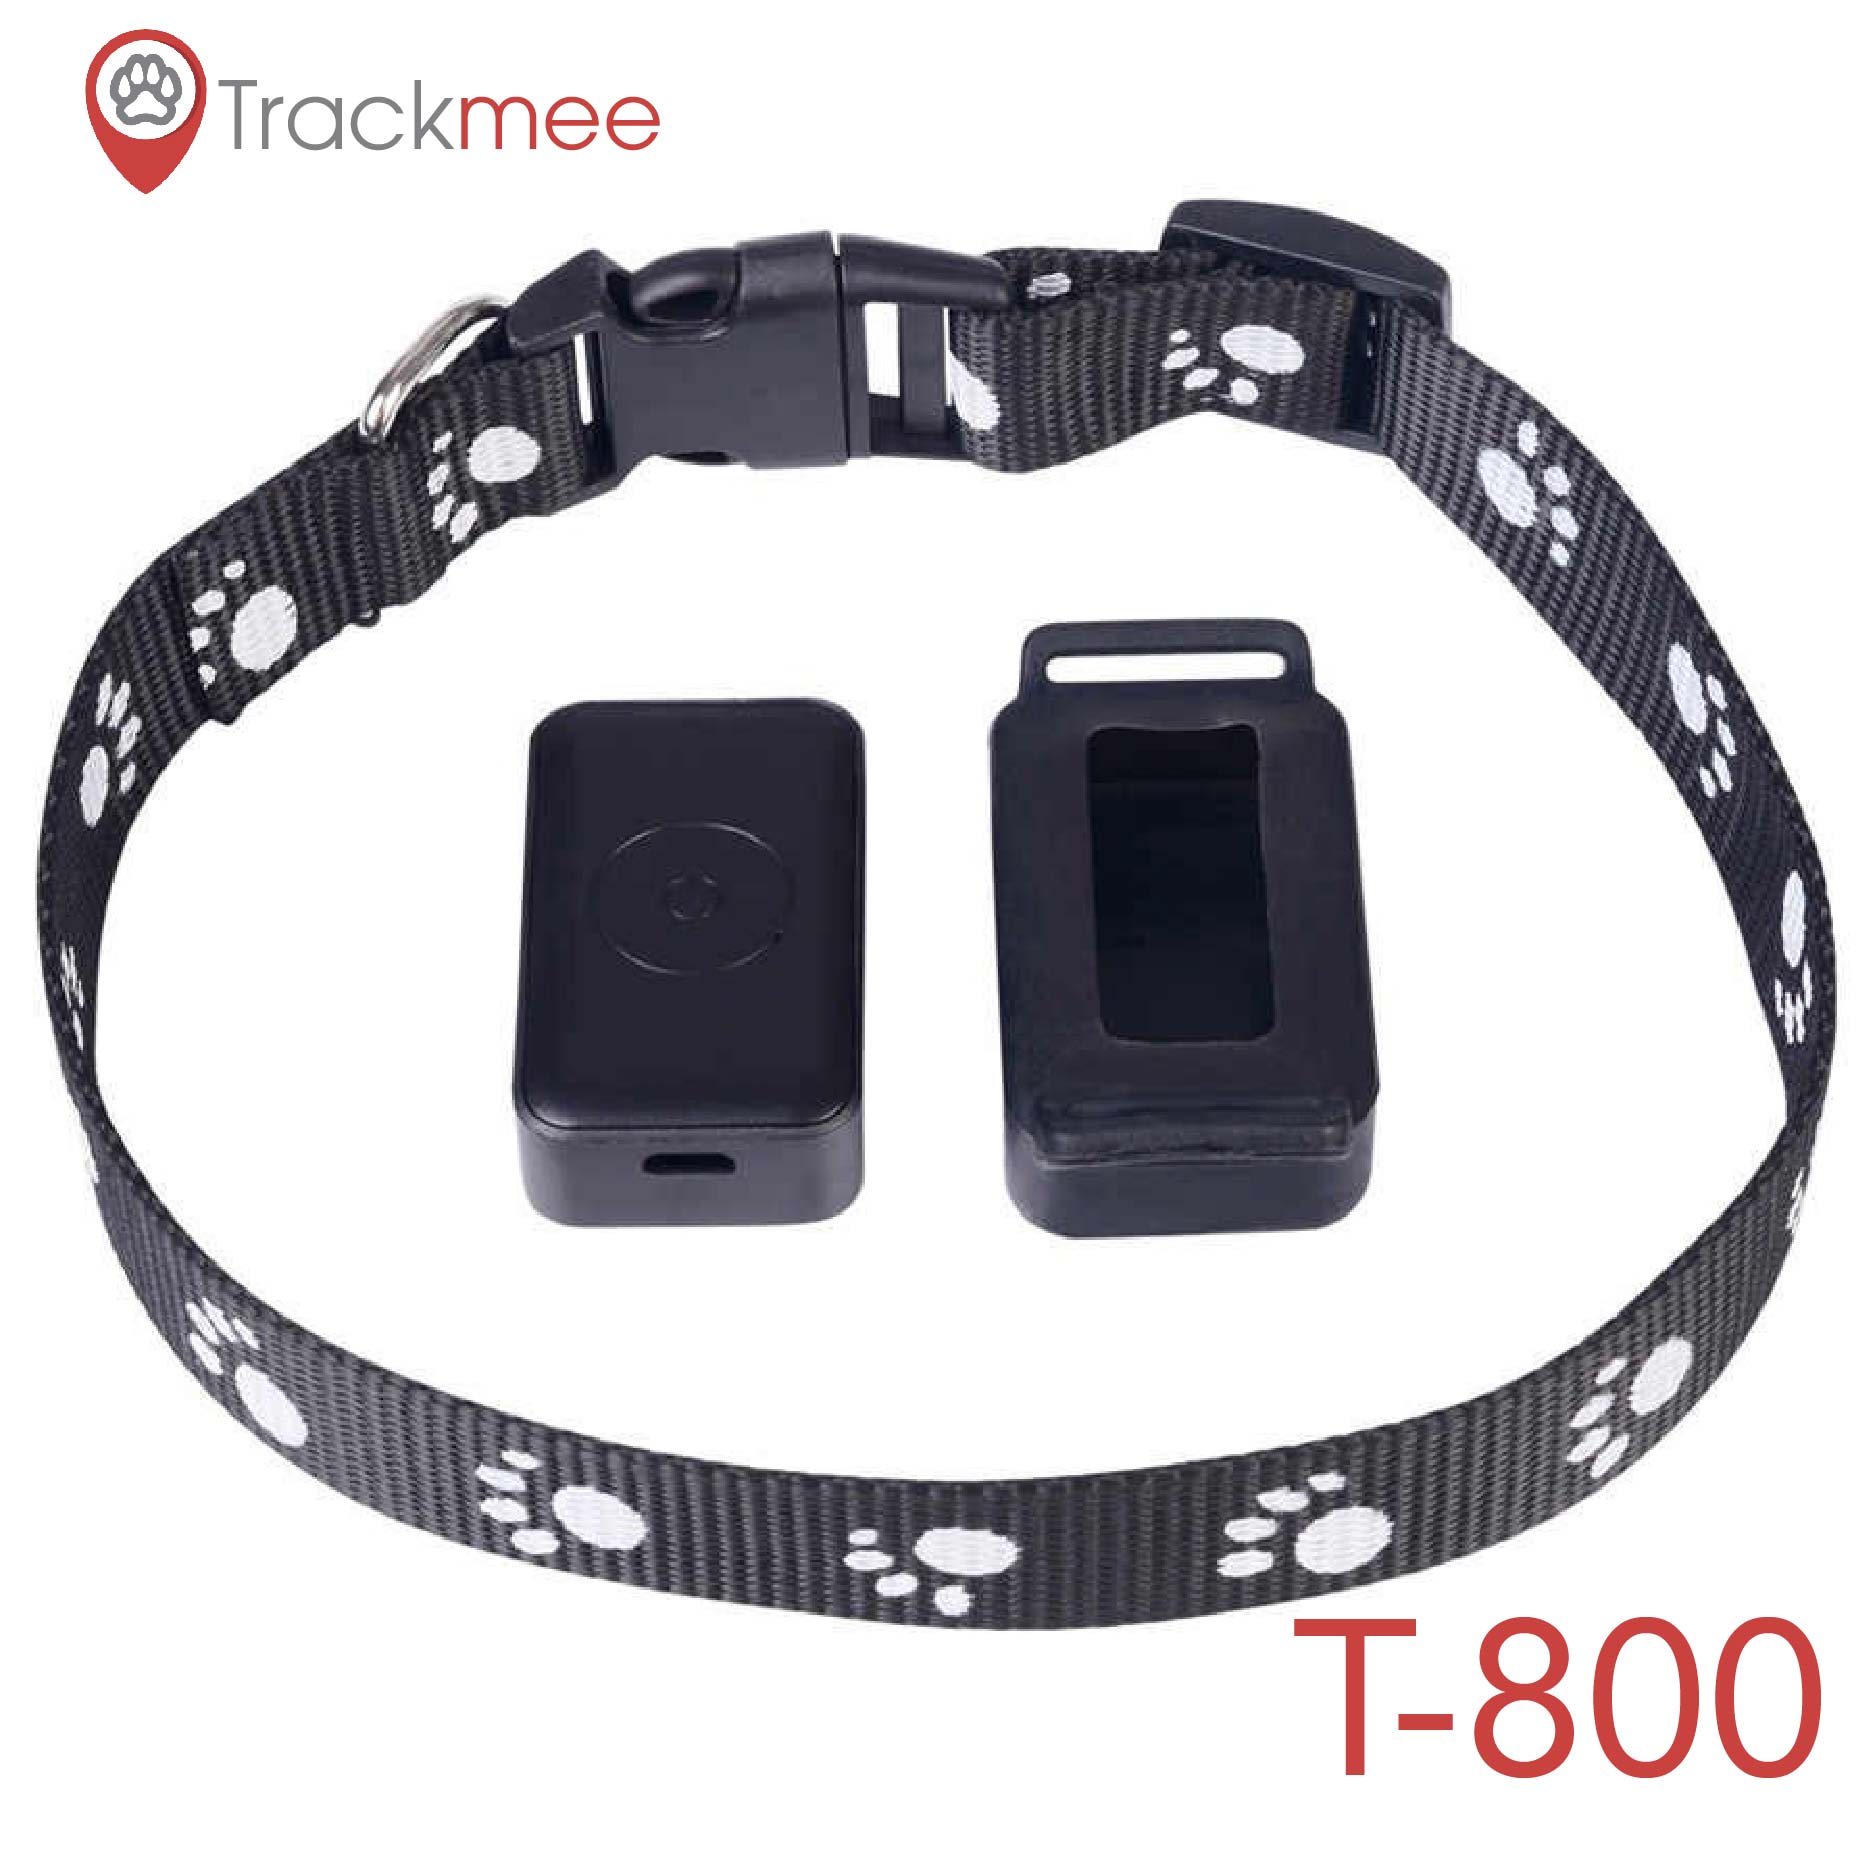 vong_co_inh_vi_thu_cung_trackmee_t8001